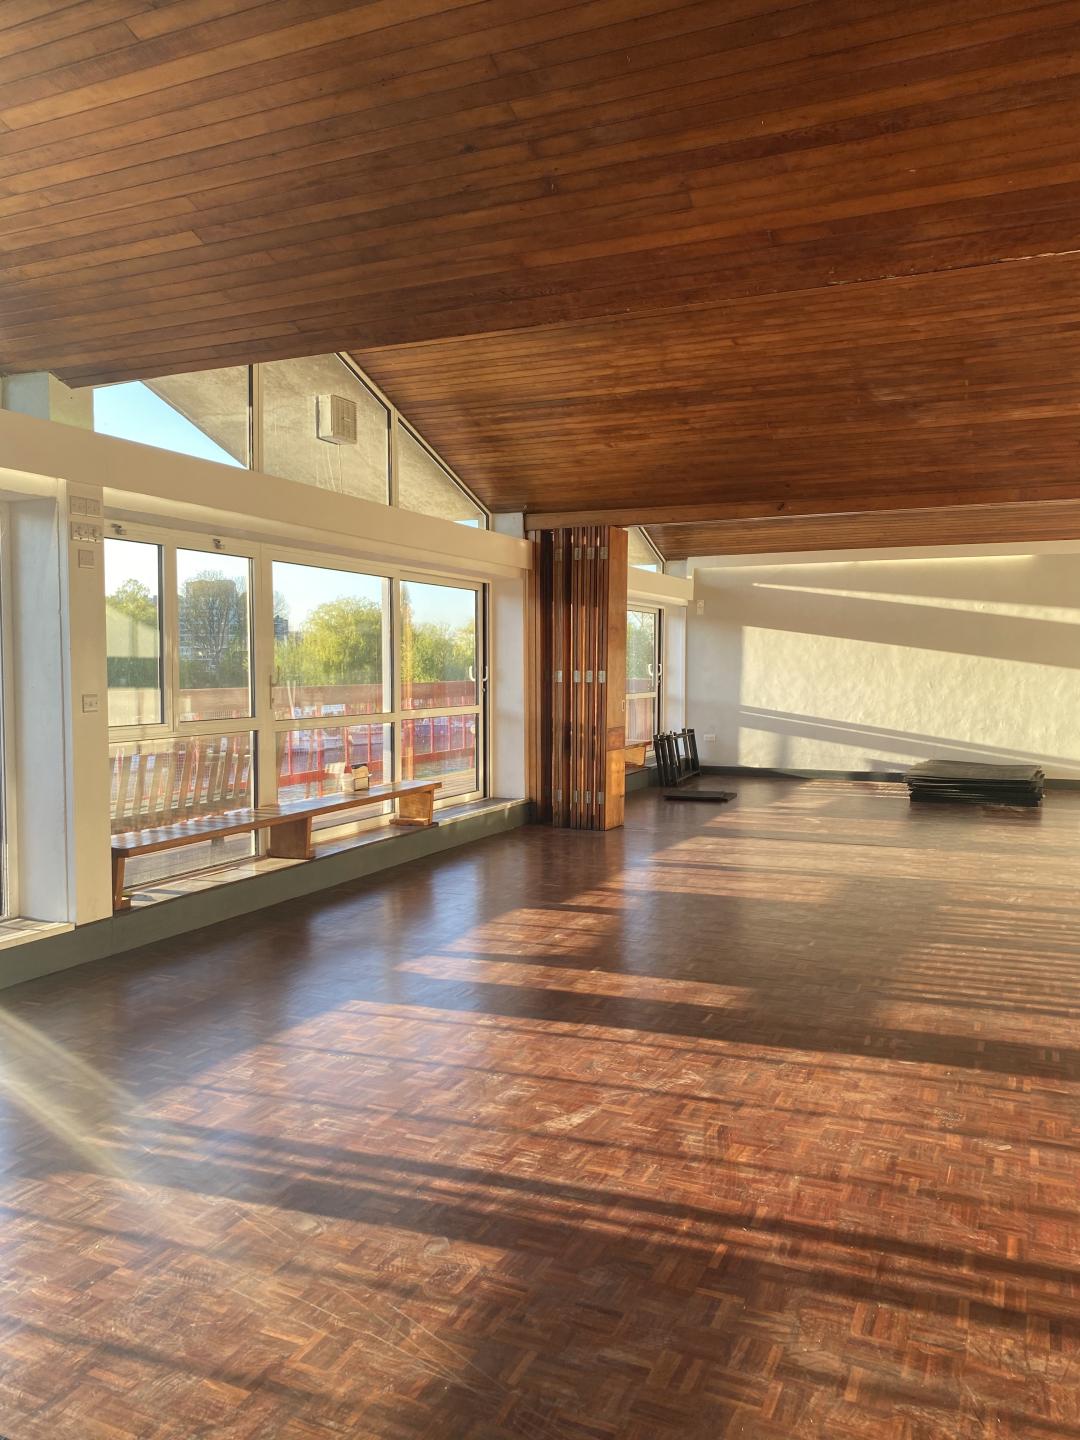 A hall with wooden floors and wooden ceiling. On the left it has floor to ceiling windows with a view of the river thames.